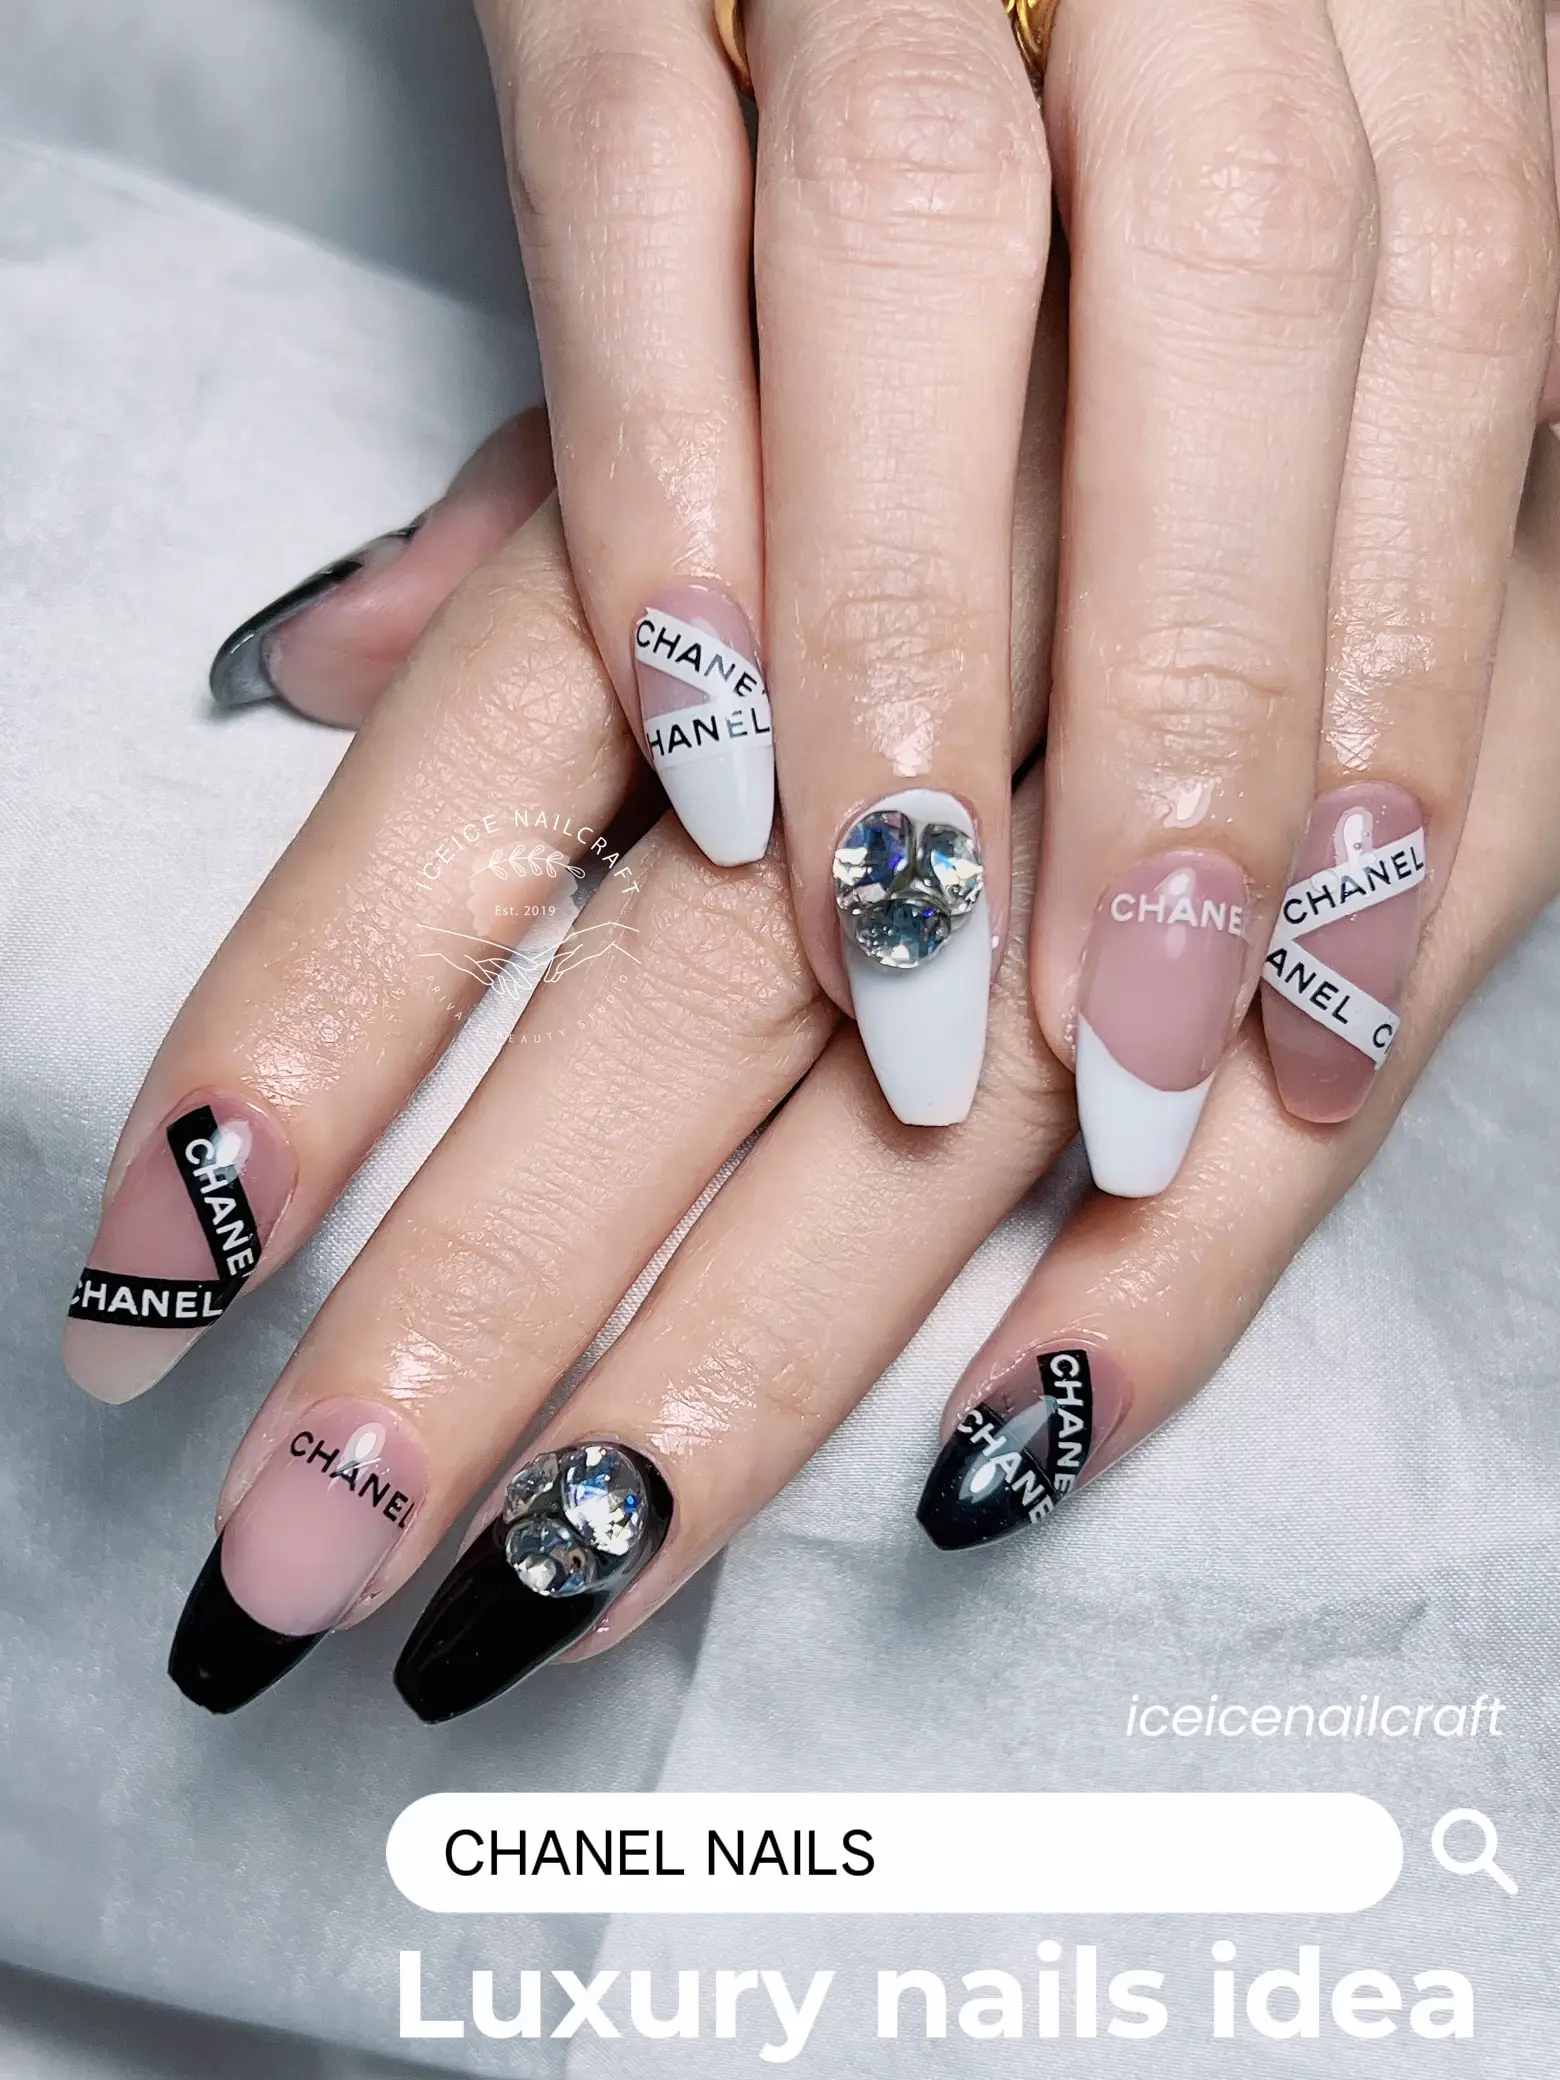 CHANEL NAILS 🖤🤍, Gallery posted by icenailcraft